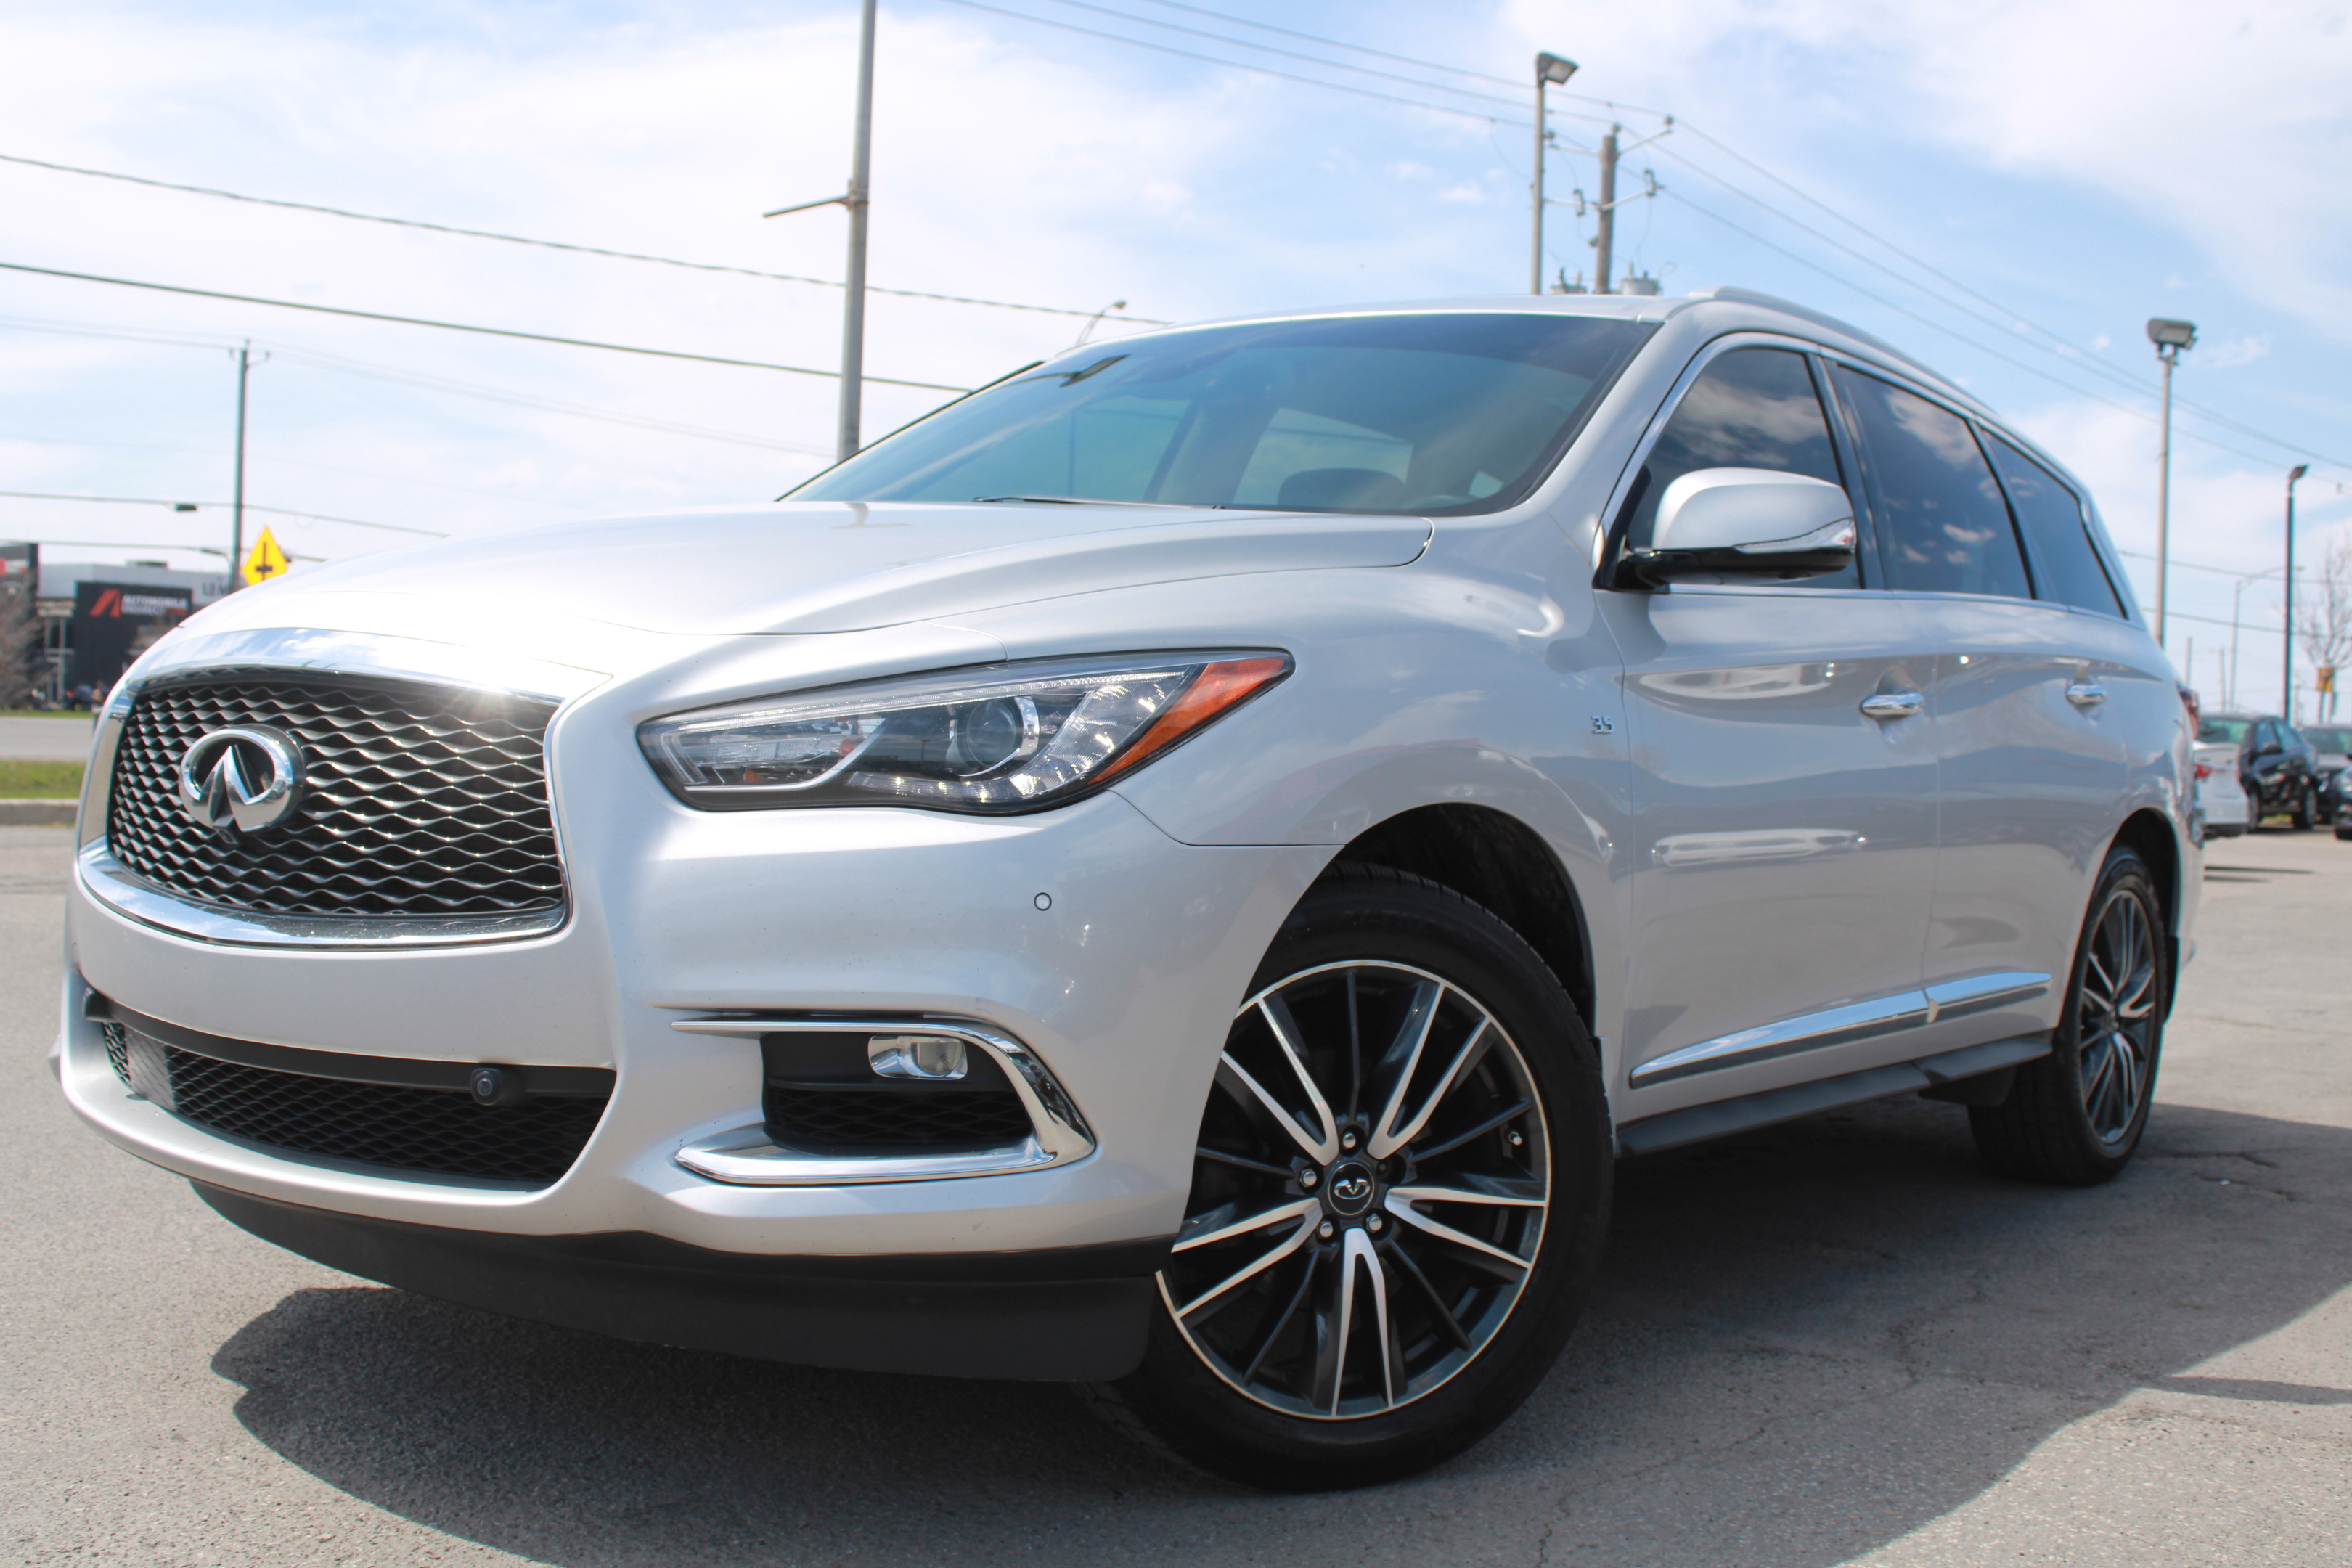 2017 Infiniti QX60 AWD, NAVIGATION, TOIT OUVRANT, MAGS, CUIR, A/C